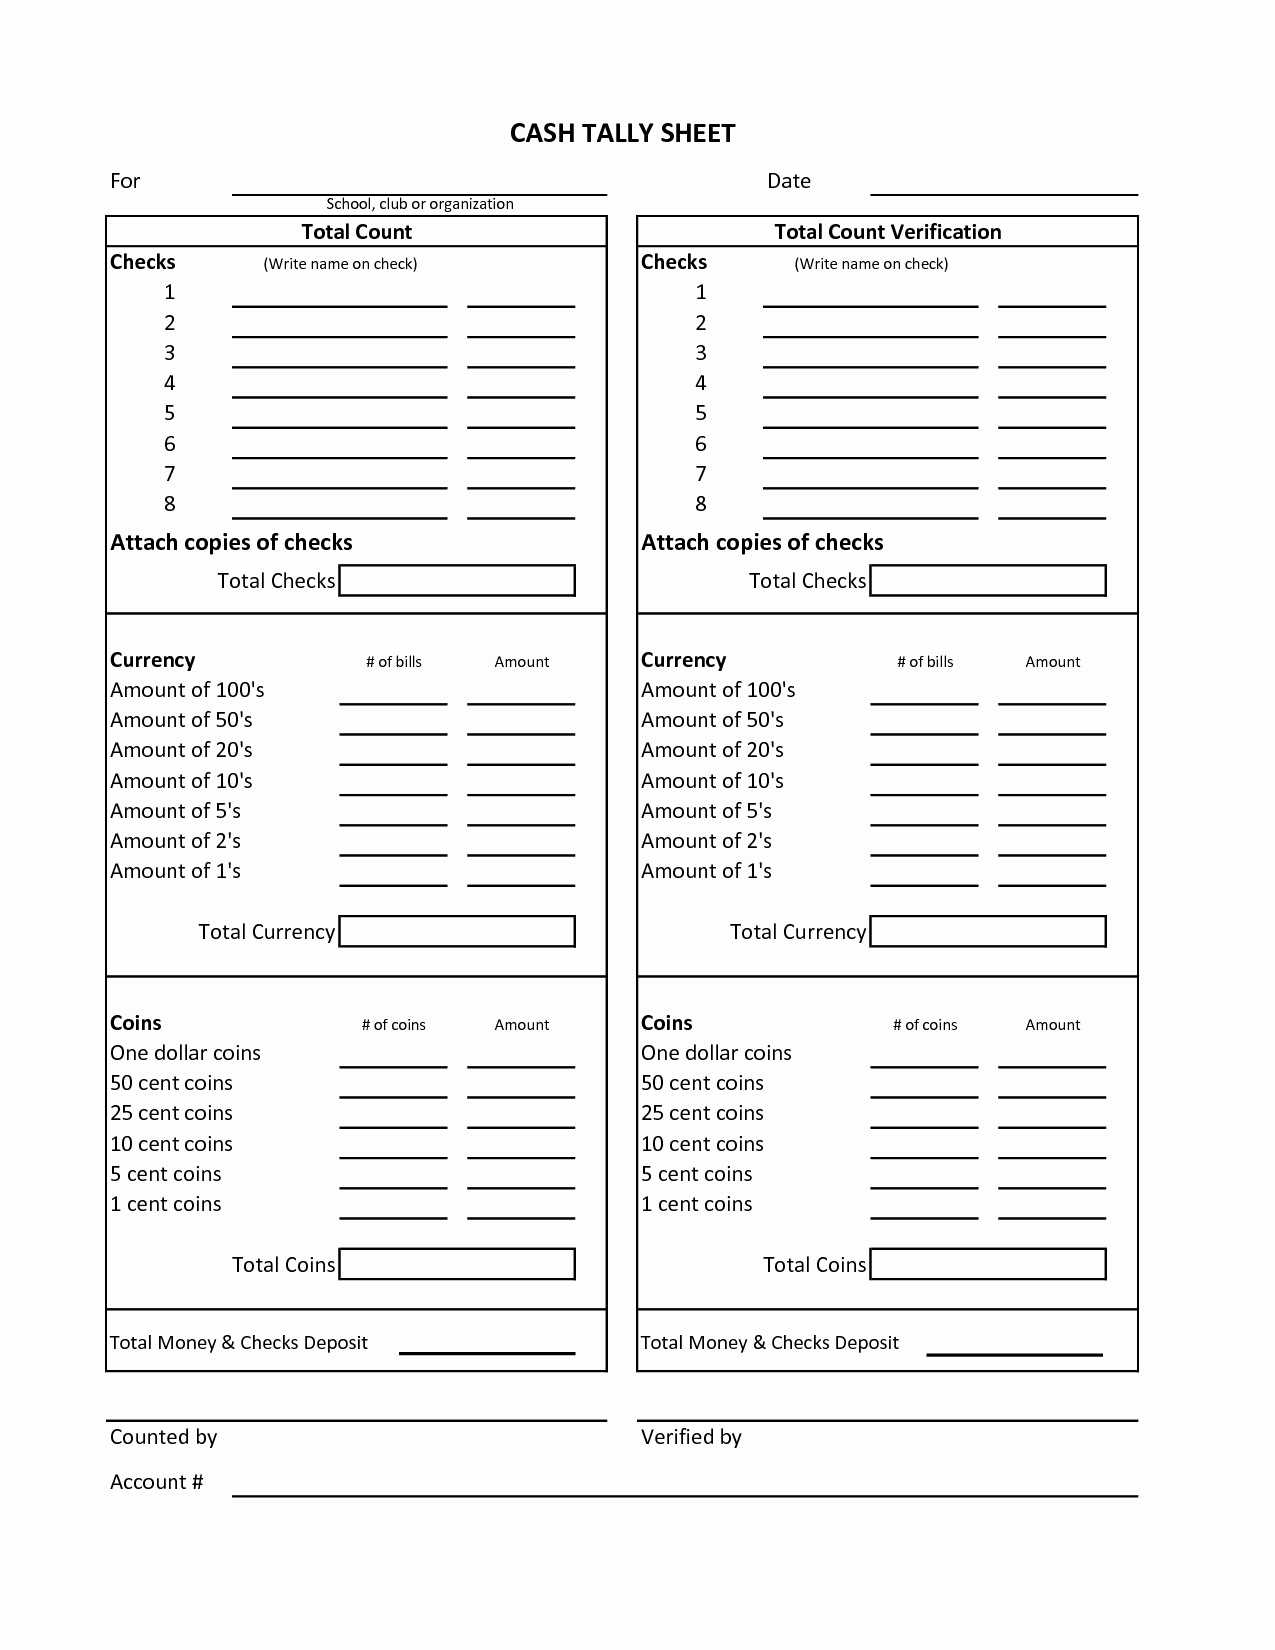 Daily Cash Sheet Template Excel Best Of Best S Of Cash Count Sheet Excel Cash Drawer Count